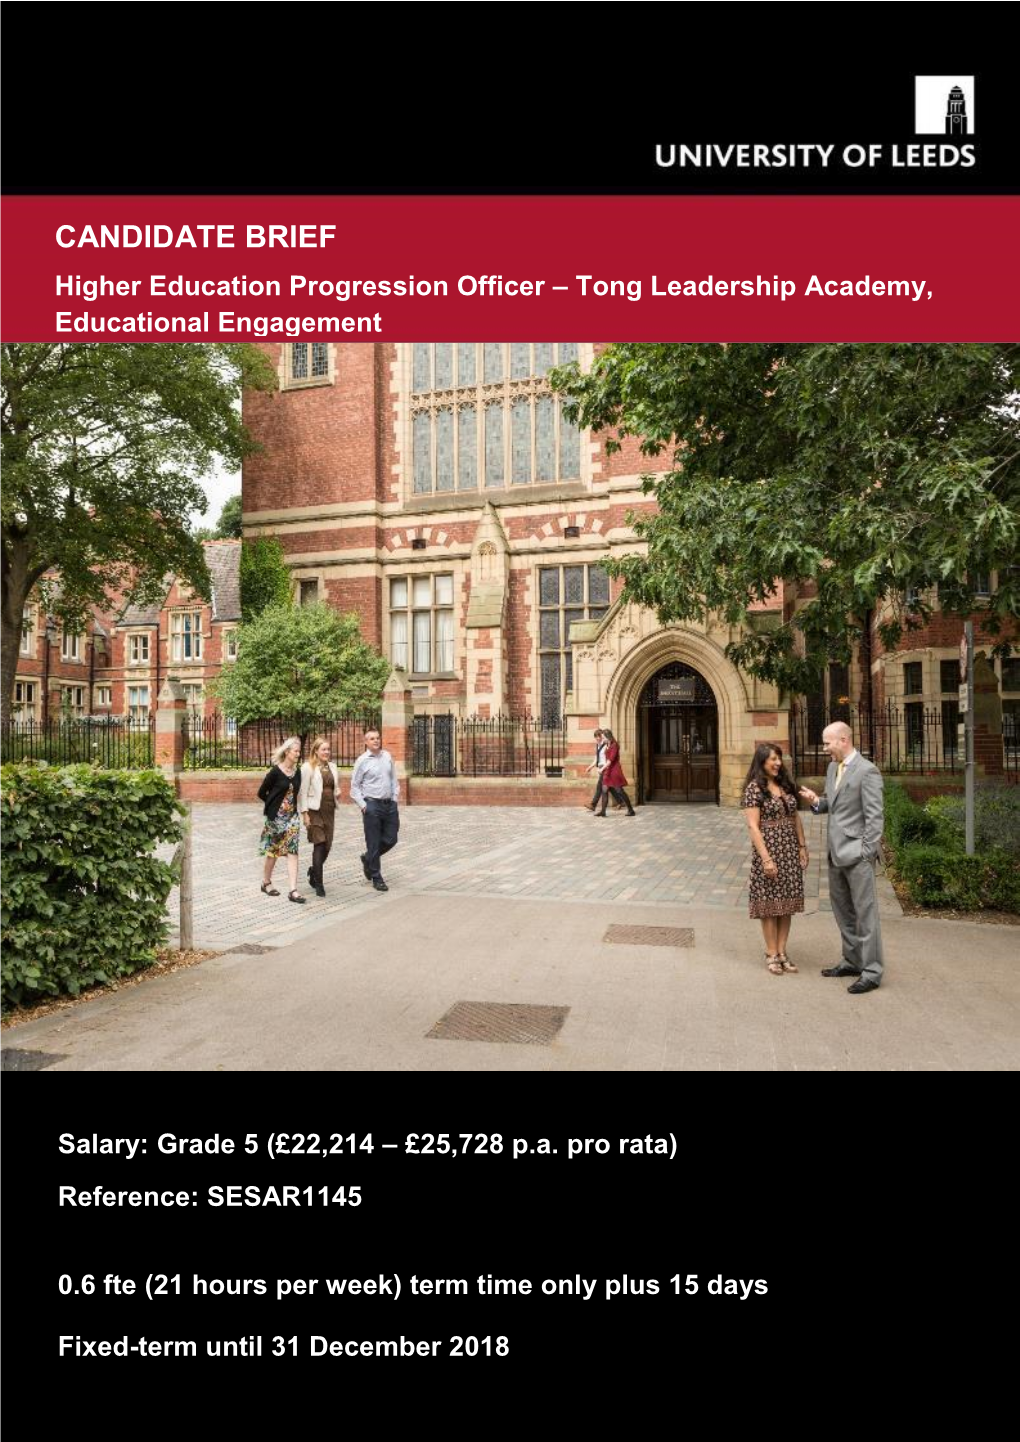 (NCOP) Higher Education Progression Officer – Tong Leadership Academy Go Higher West Yorkshire